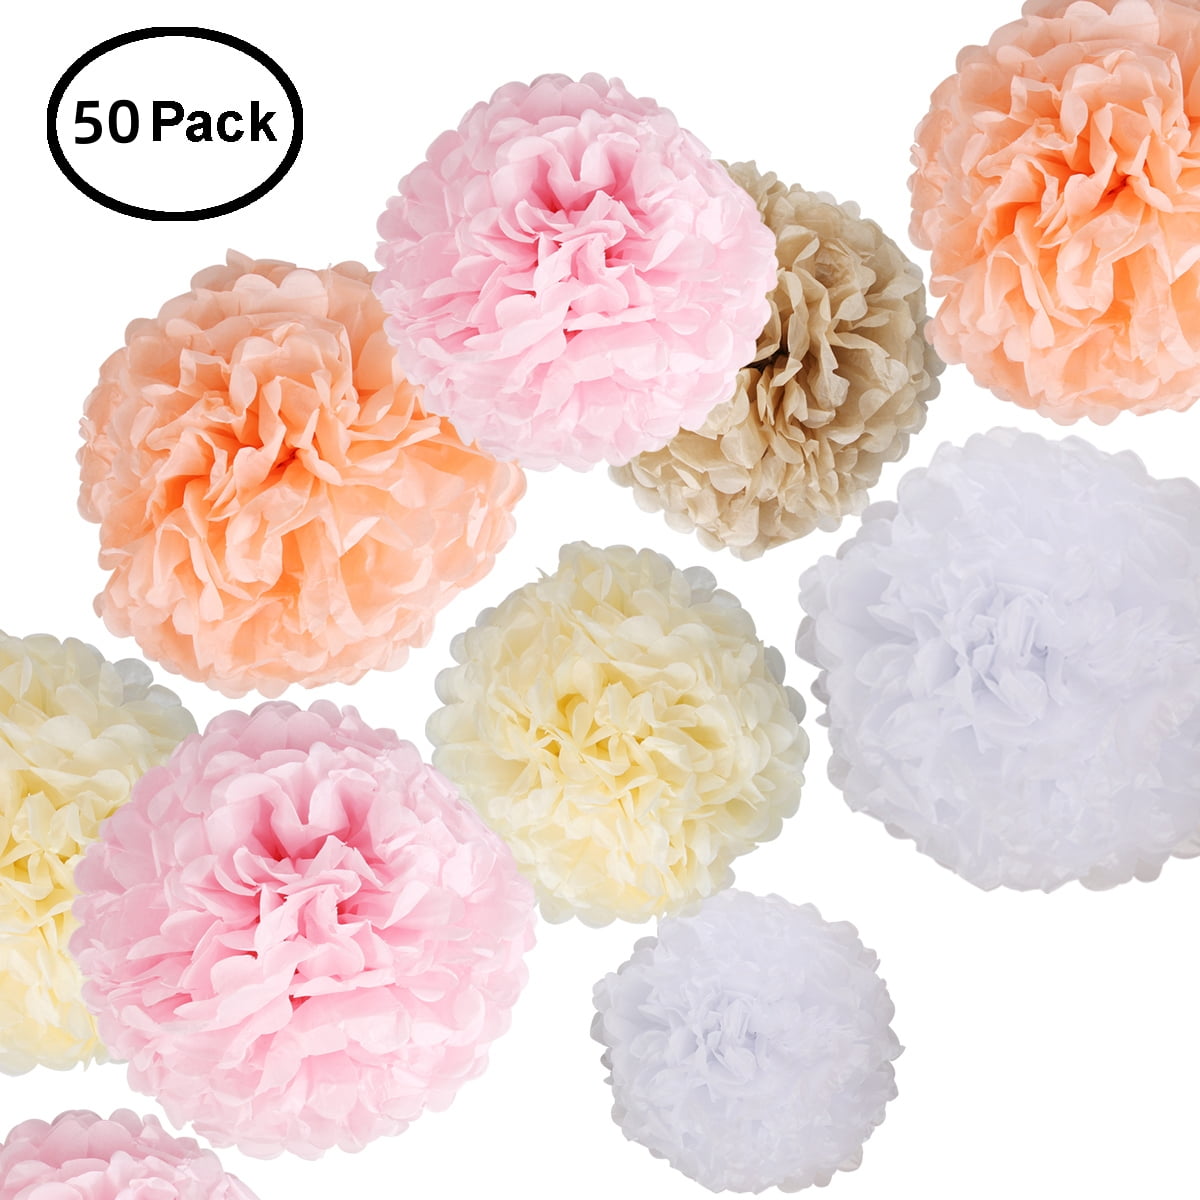 Avoseta Pastel Tissue Paper Pom Poms - Set of 20 - Sizes of 6, 8, 10,  14 - Paper Flower Party Decorations for Birthdays, Weddings and Special